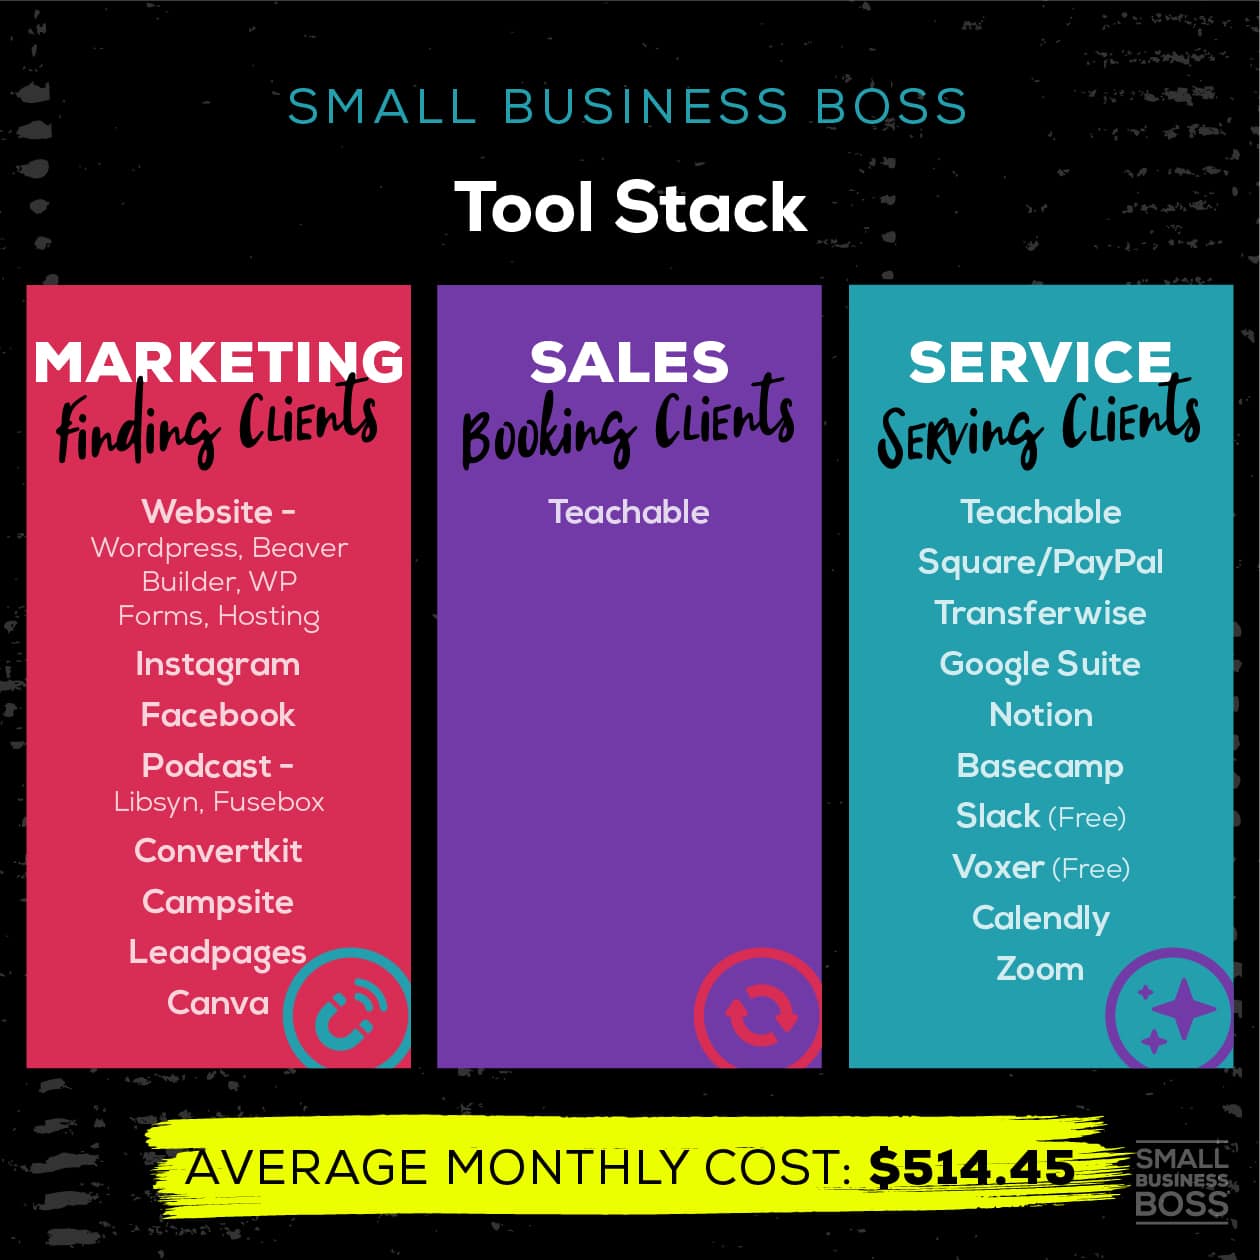 image of the small business boss tool stack